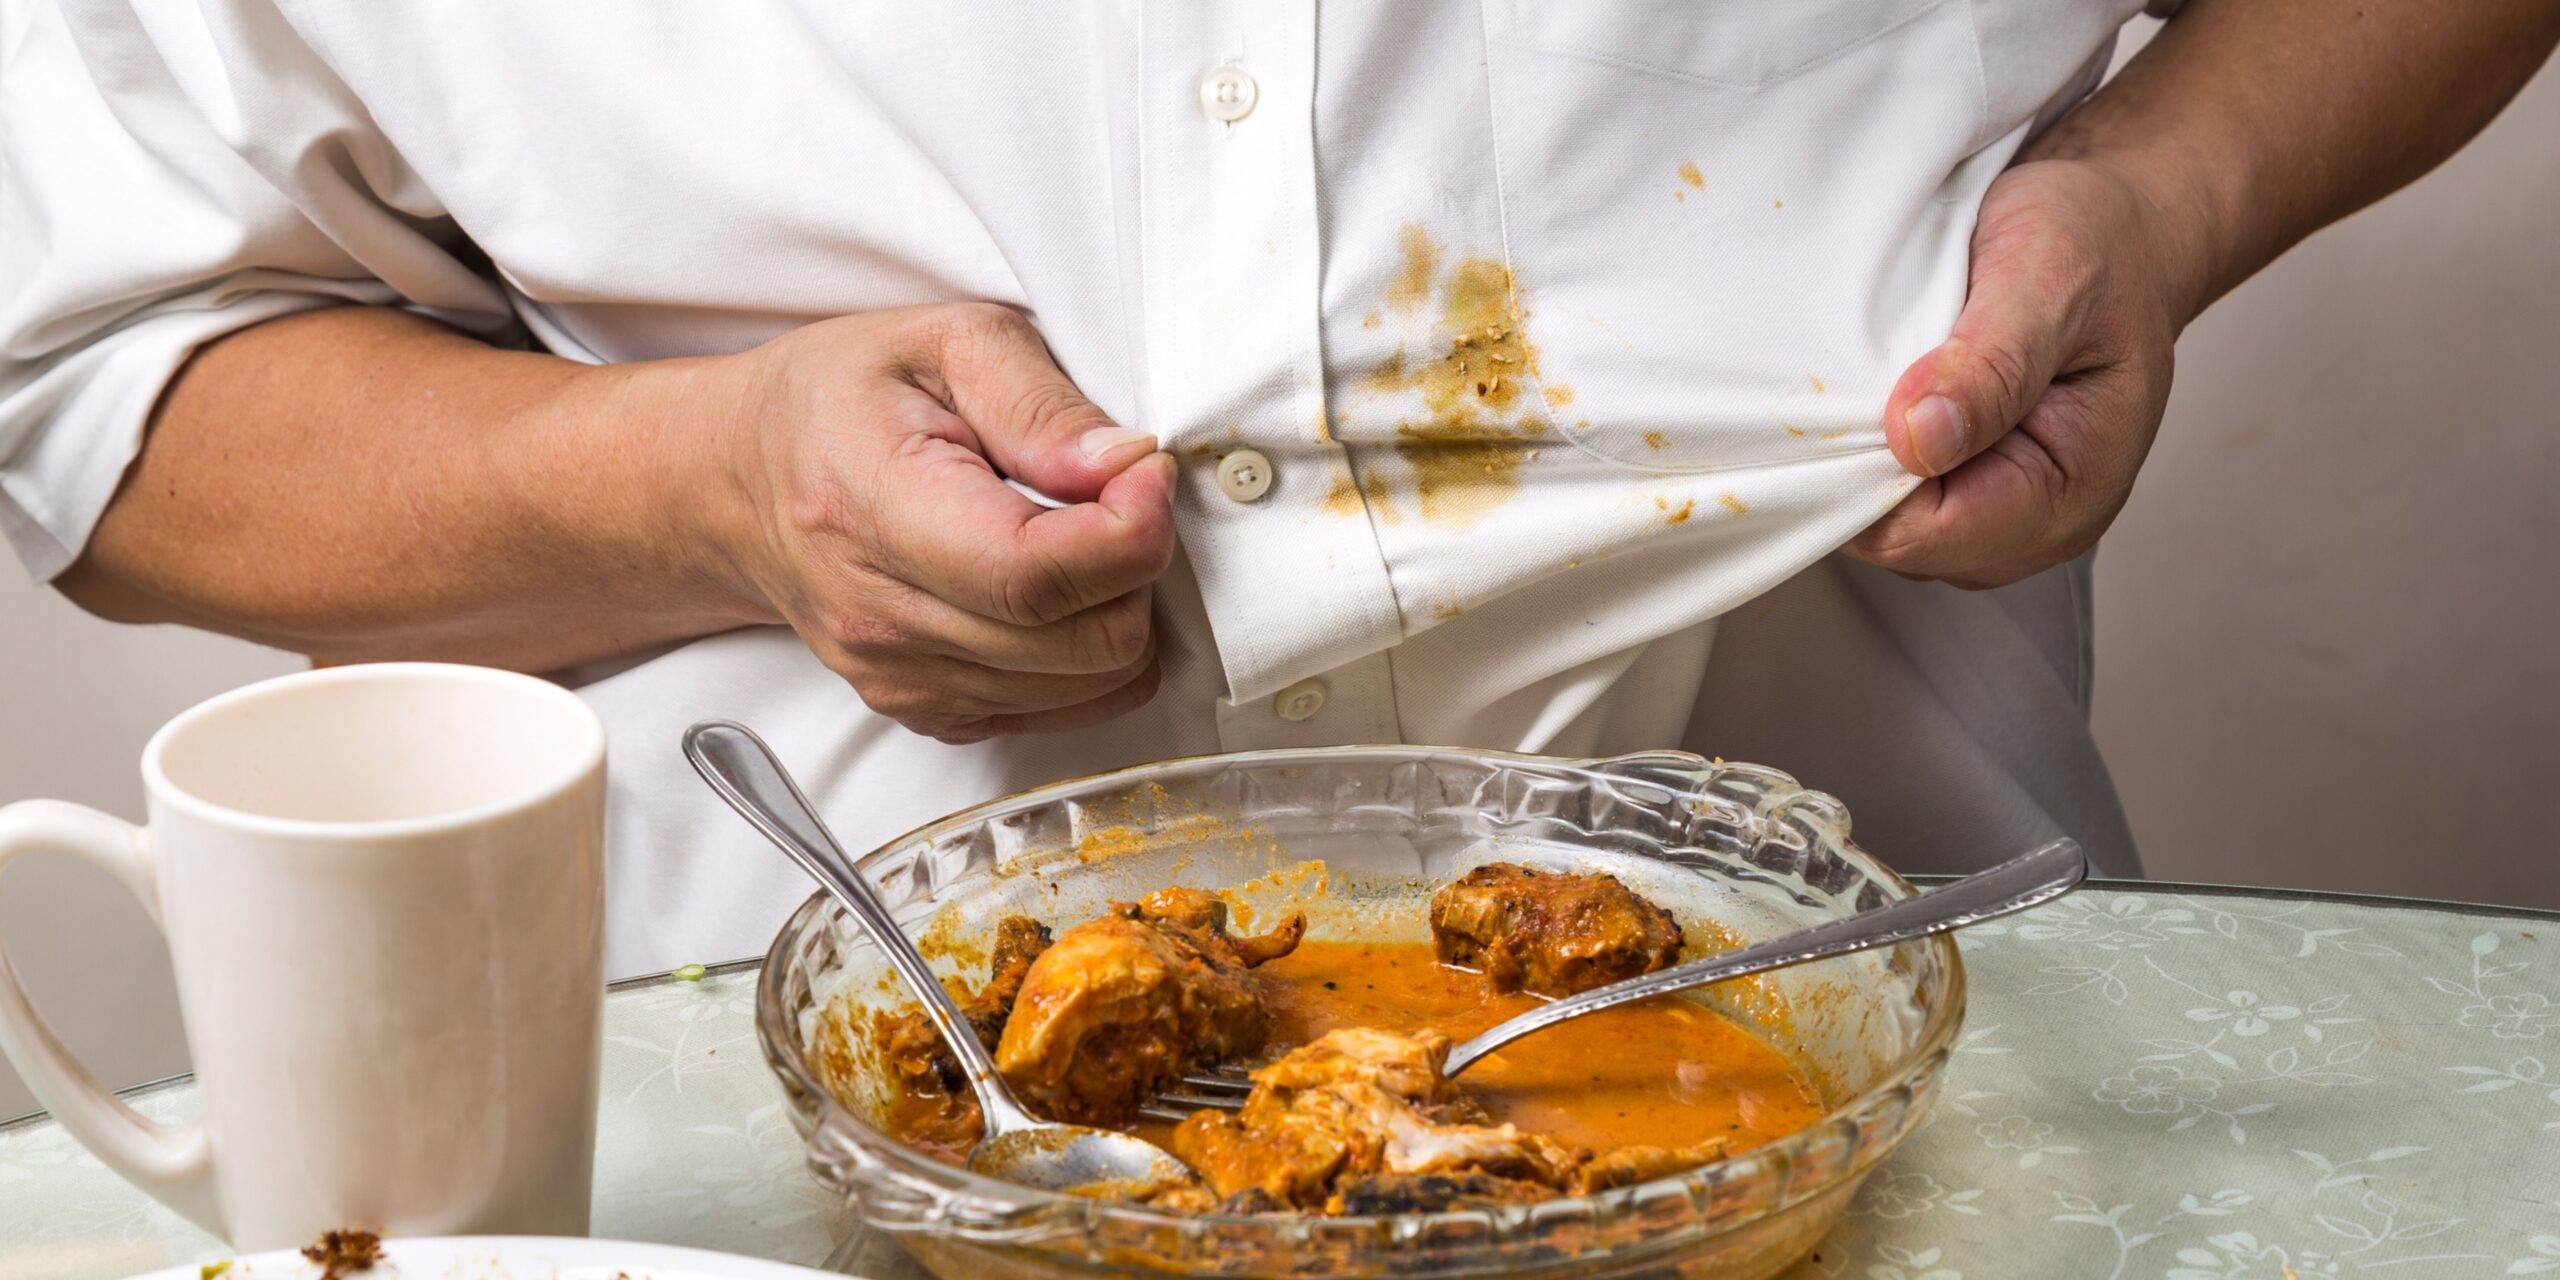 How to Remove Curry Stains